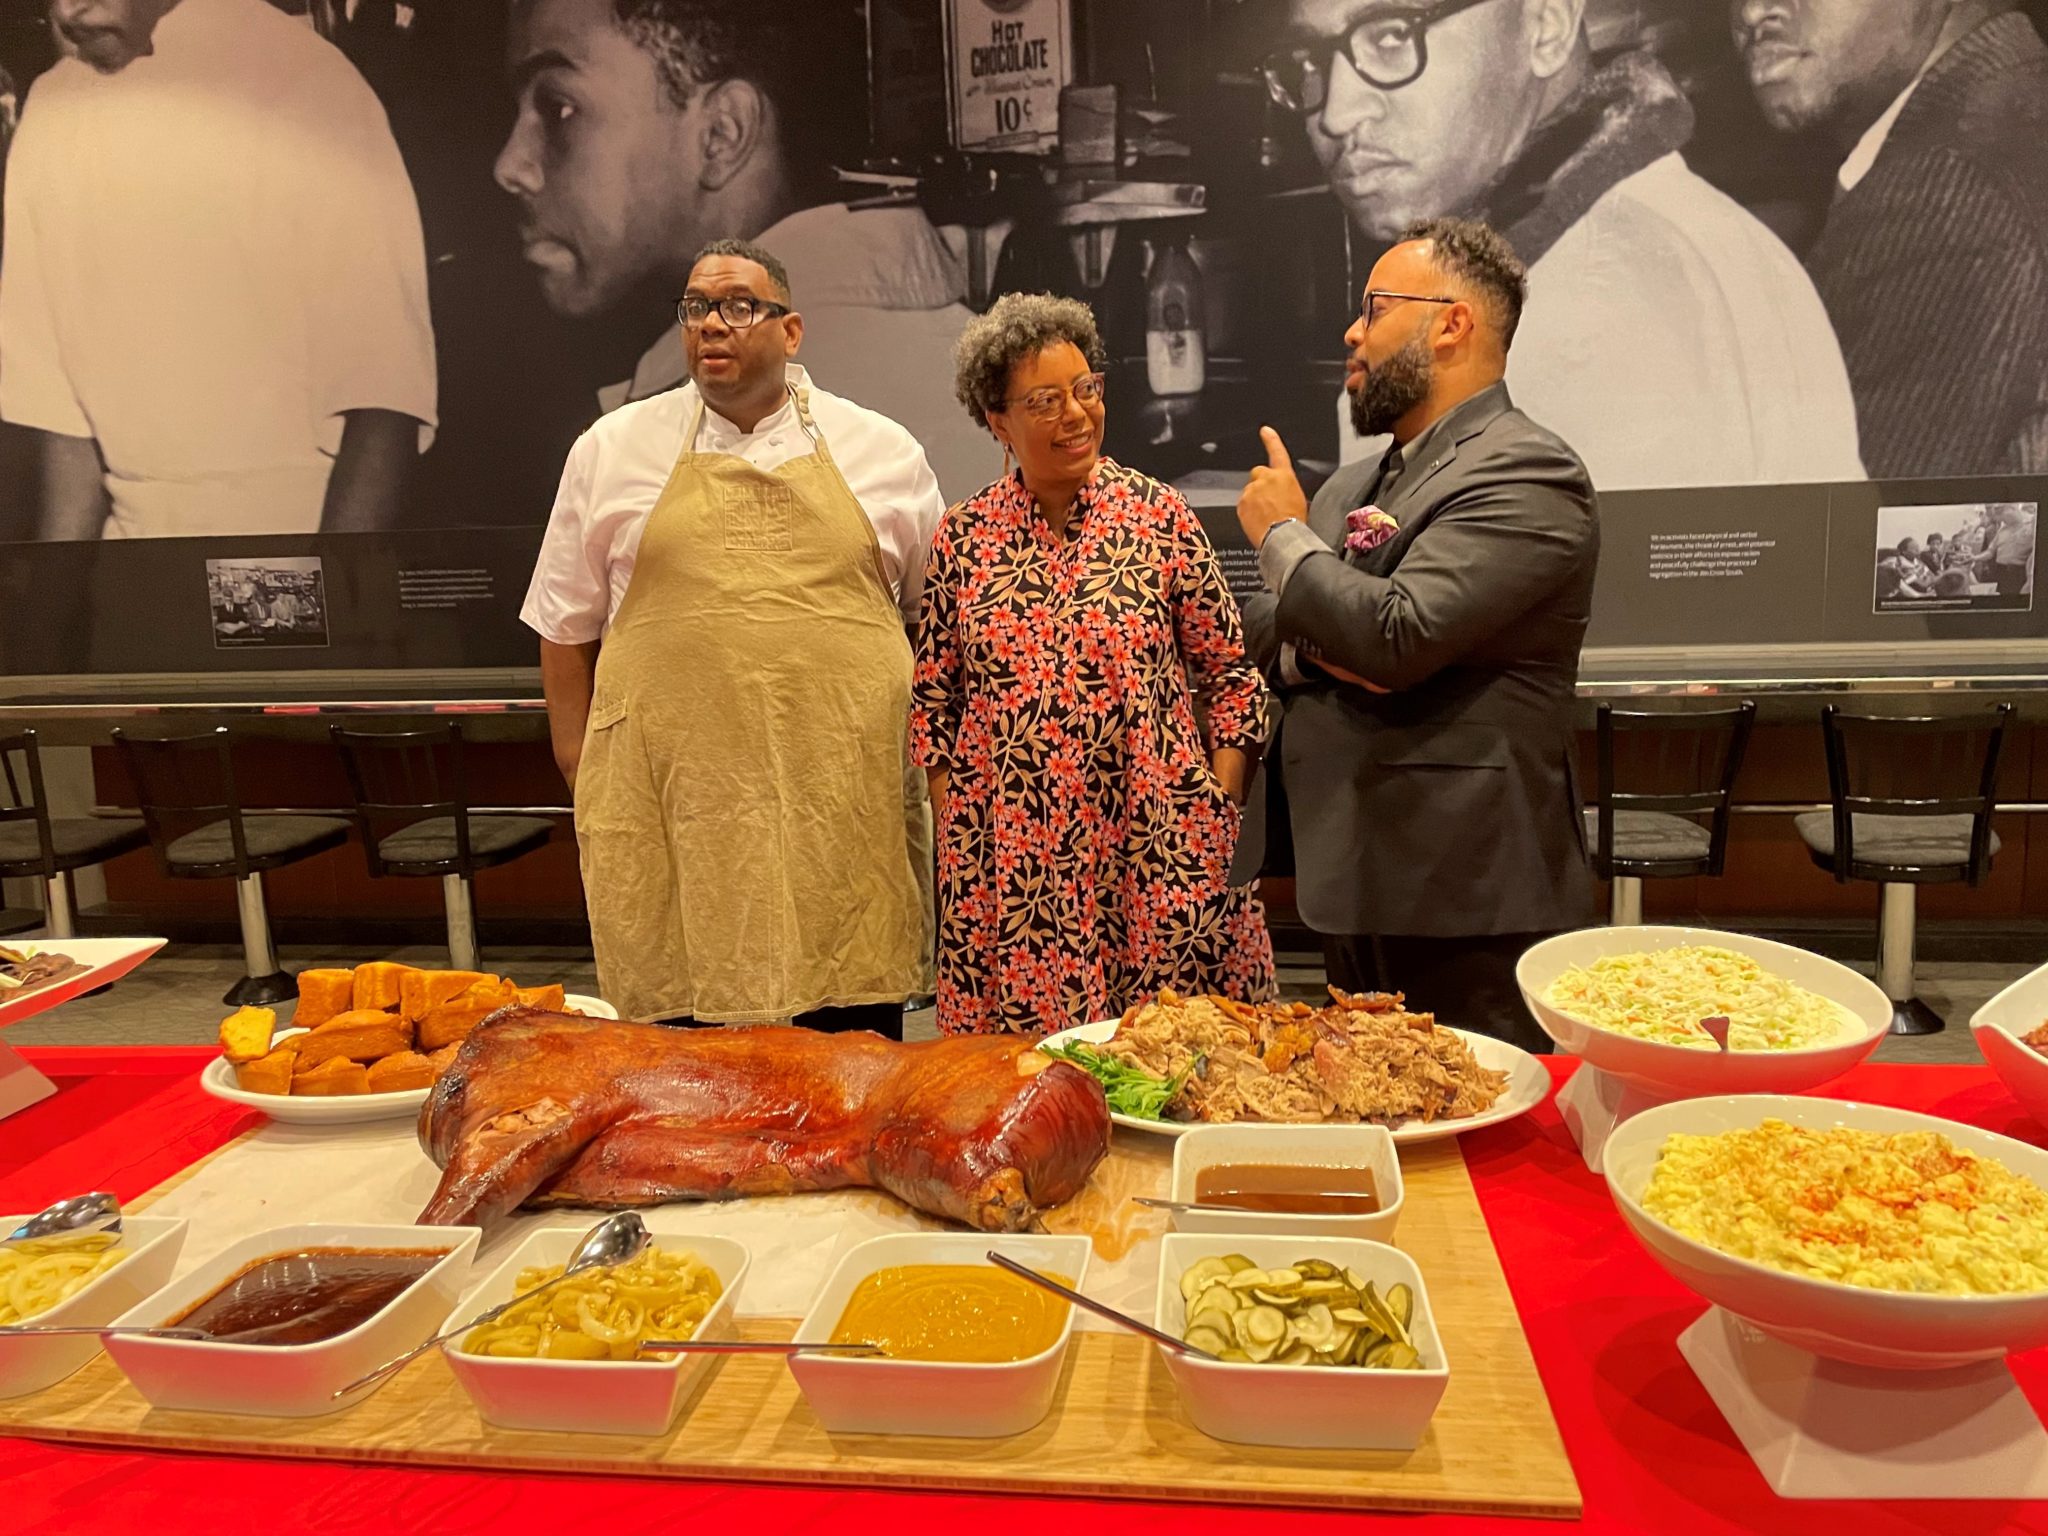 Chef Ramin Coles, Joanne Hyppolite and Jason Spear at the media day discussing the special menu for Juneteenth.  (Photo: Restaurant Associates)